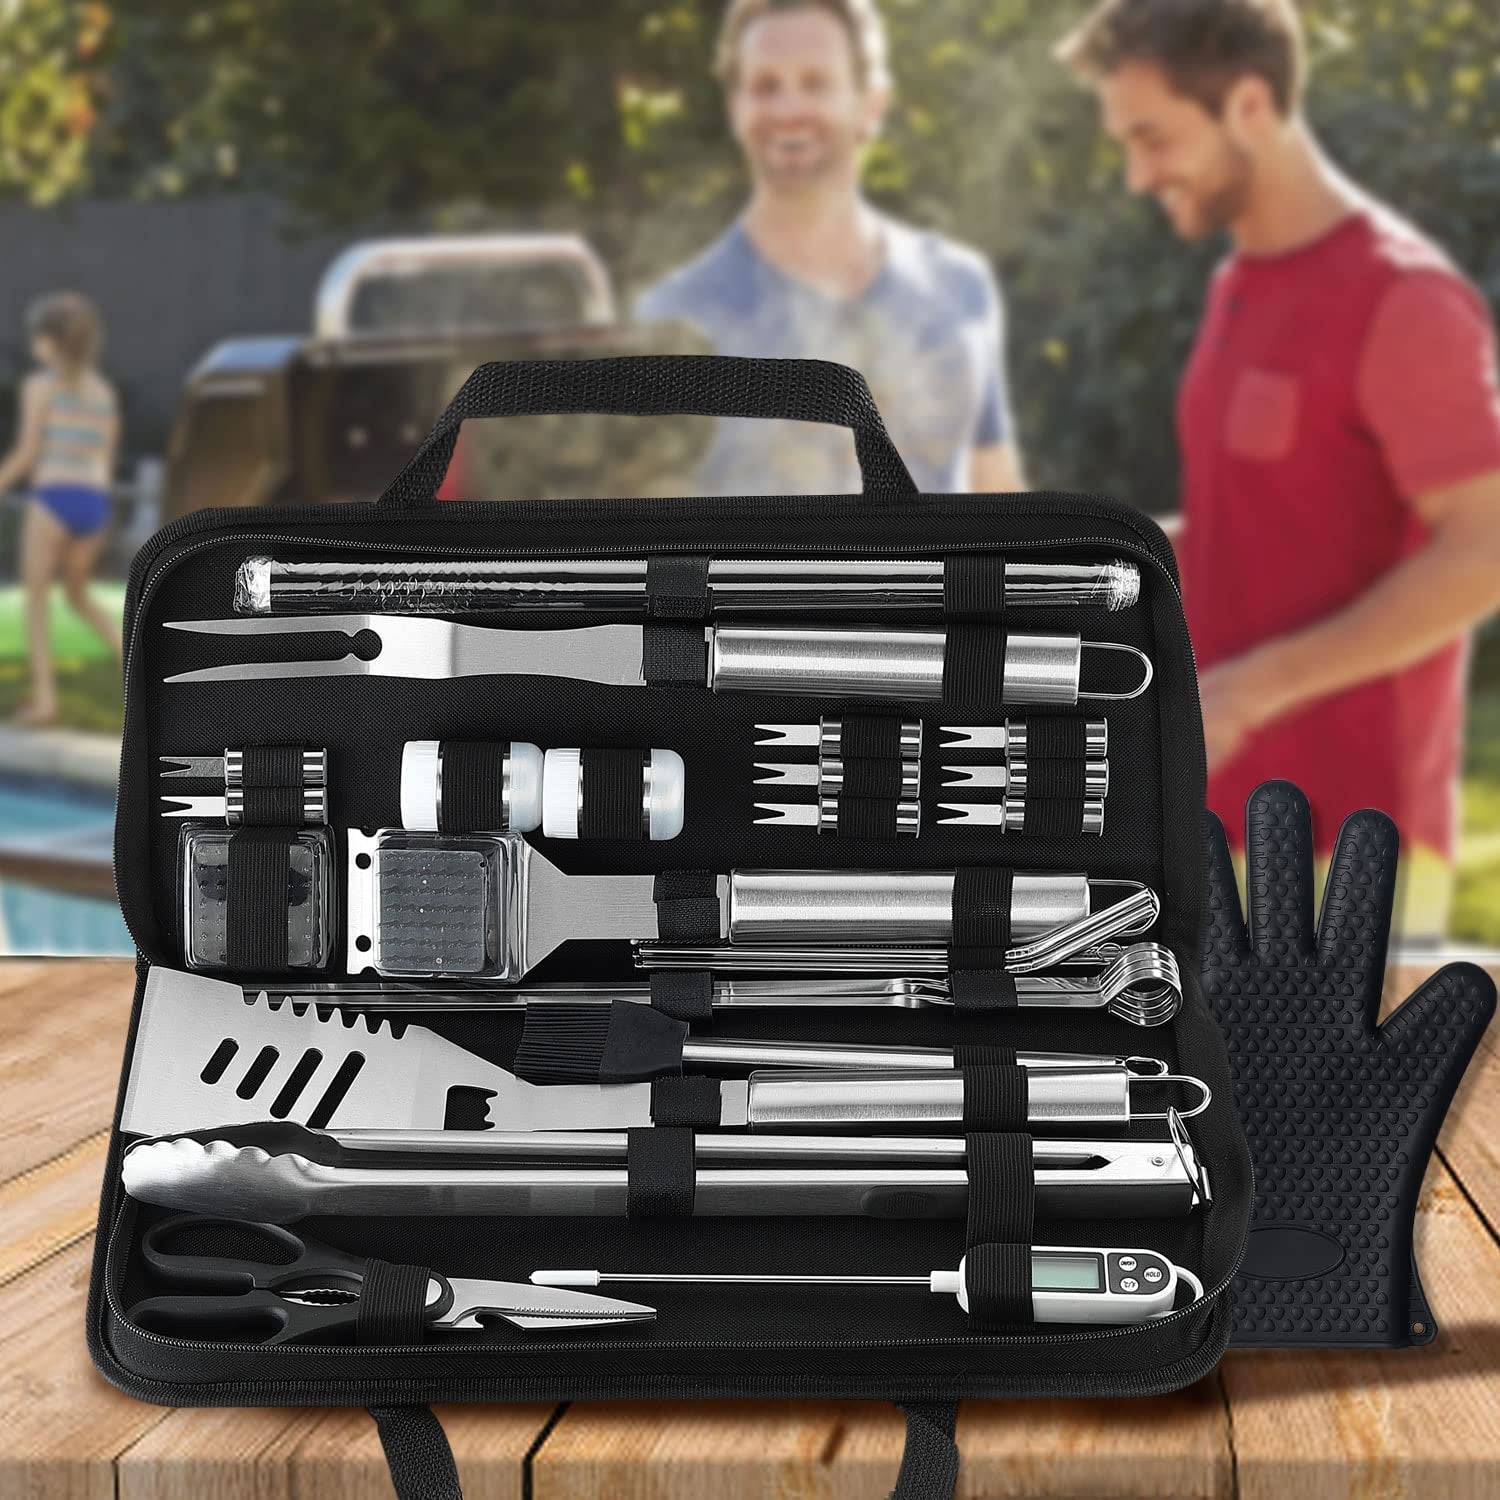 Professional Grade 31-Piece Stainless Steel BBQ Grilling Tool Set with Storage Bag - Ideal for Camping, Tailgating, and Father's Day - For Men and Women